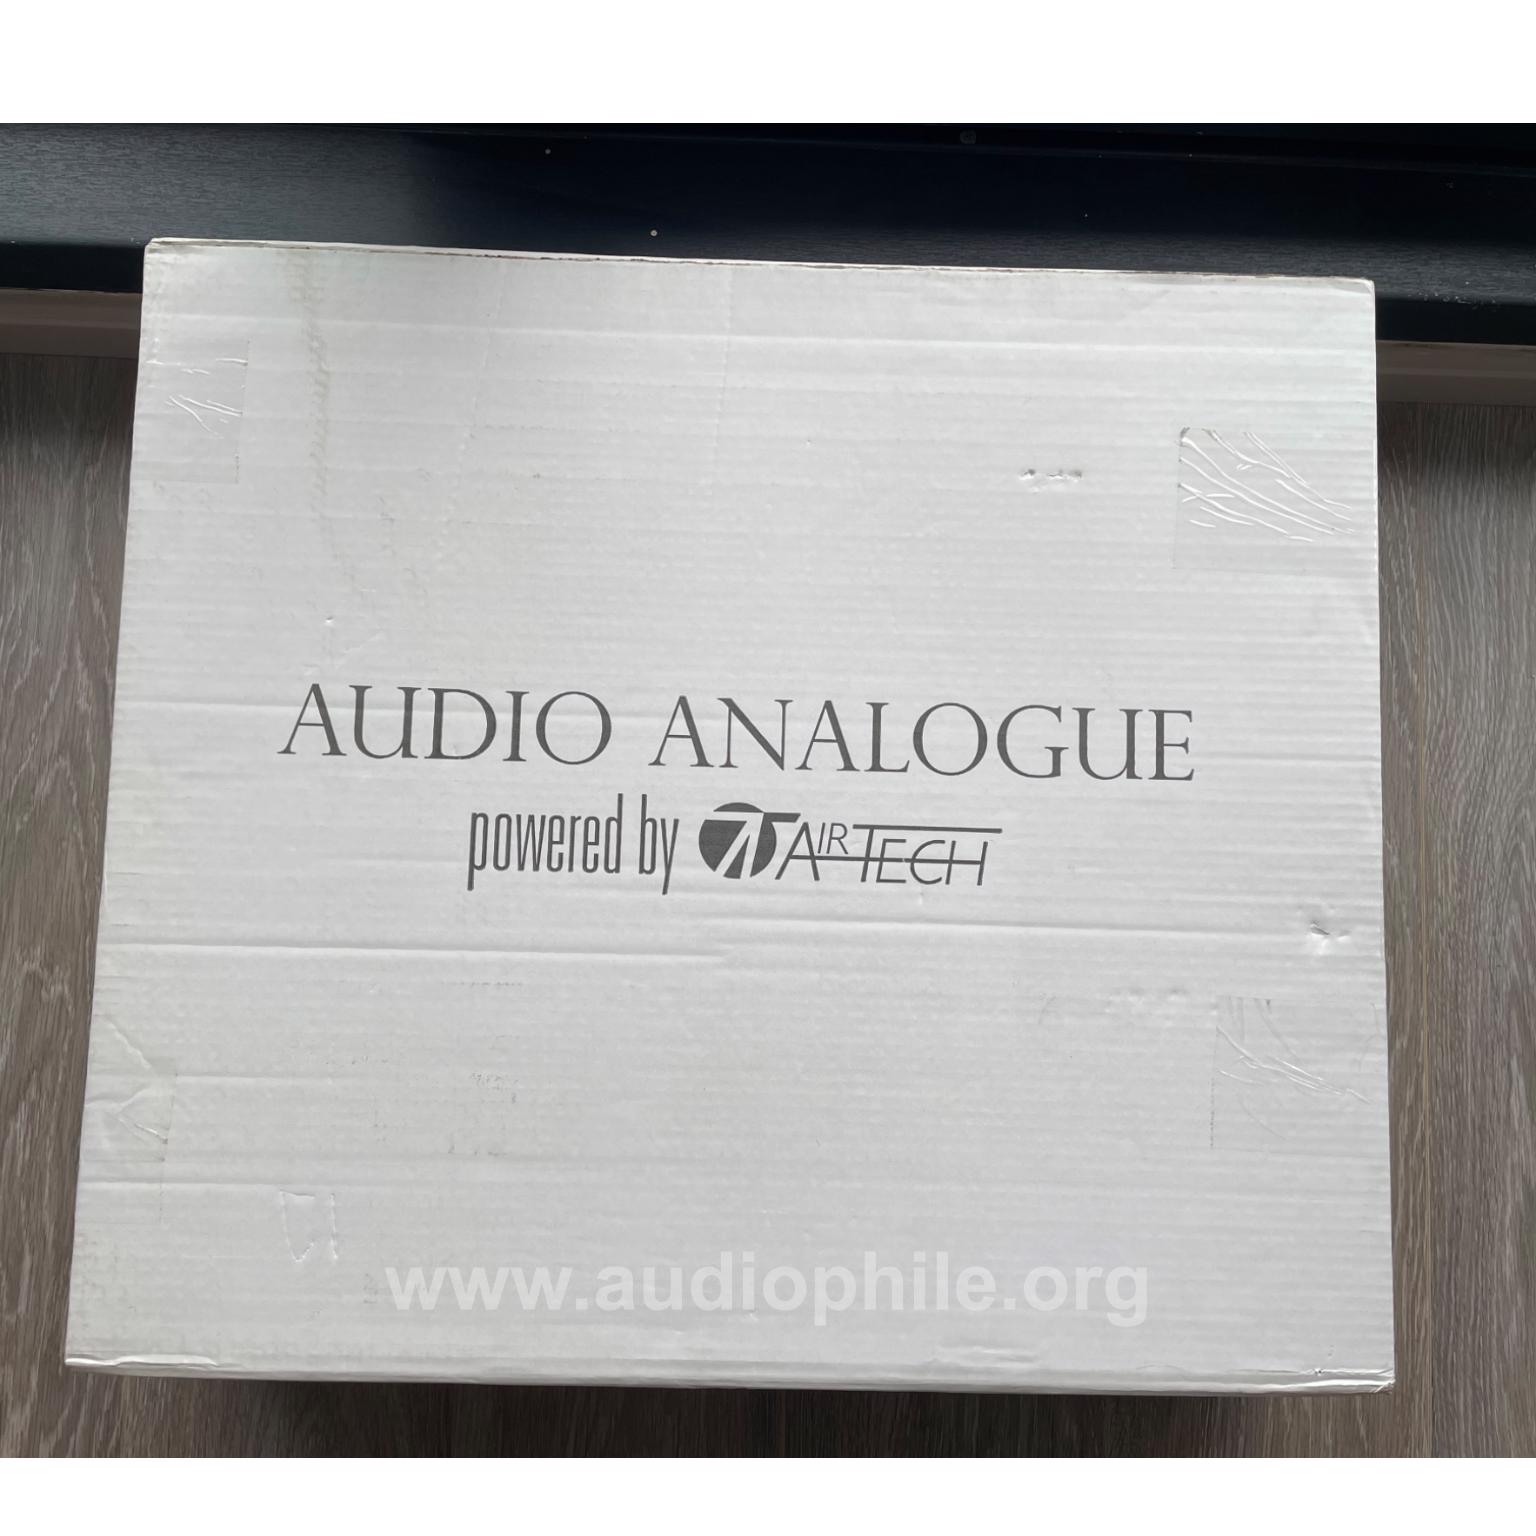 Audio analogue crescendo ıntegrated by airtech